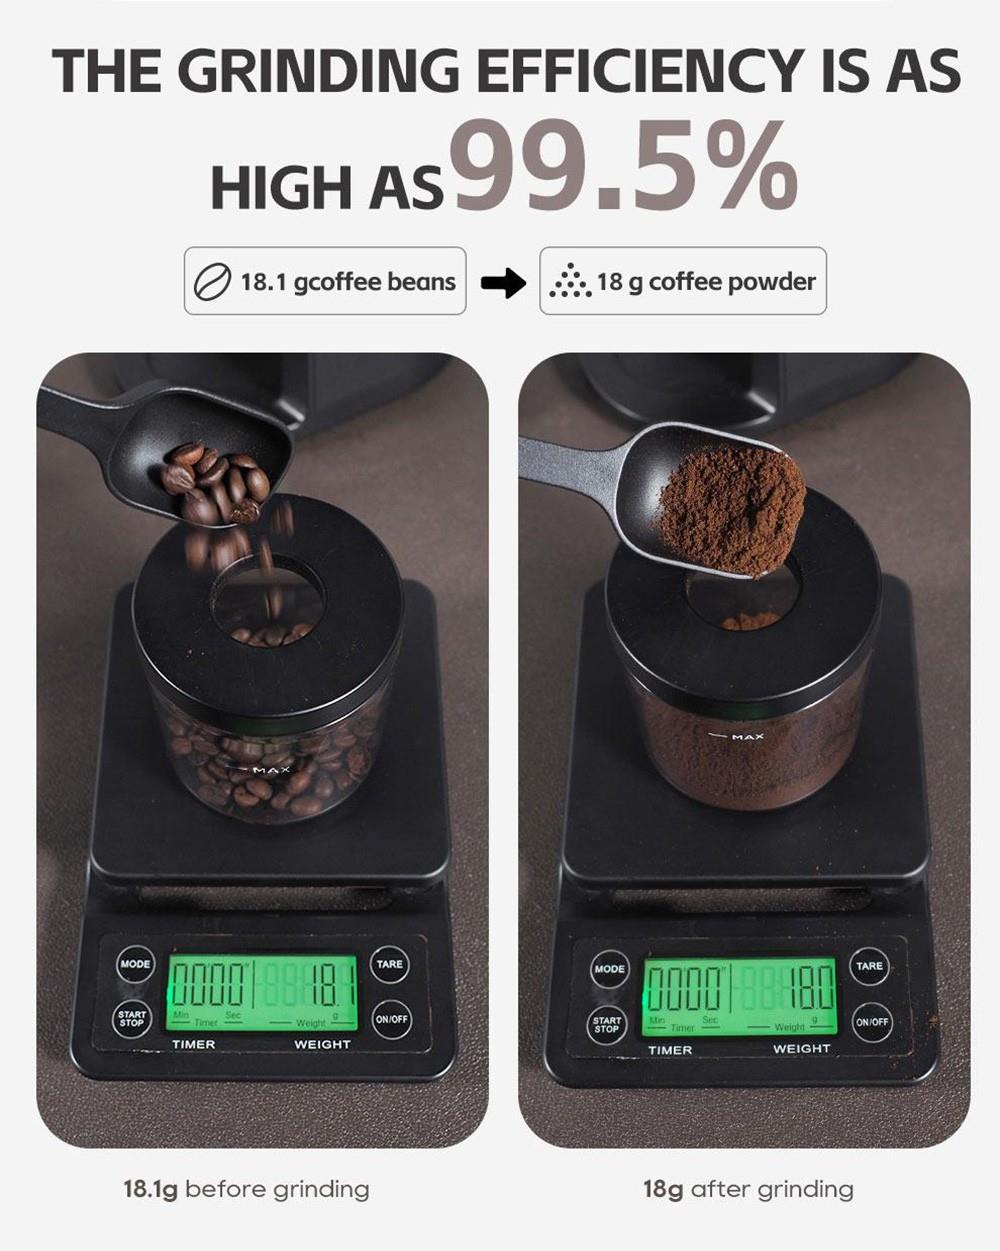 HiBREW G3 Electric Coffee Grinder, 34-Gear Scale, 210g Bean Container, 100g Powder Tank, 48mm Conical Burr